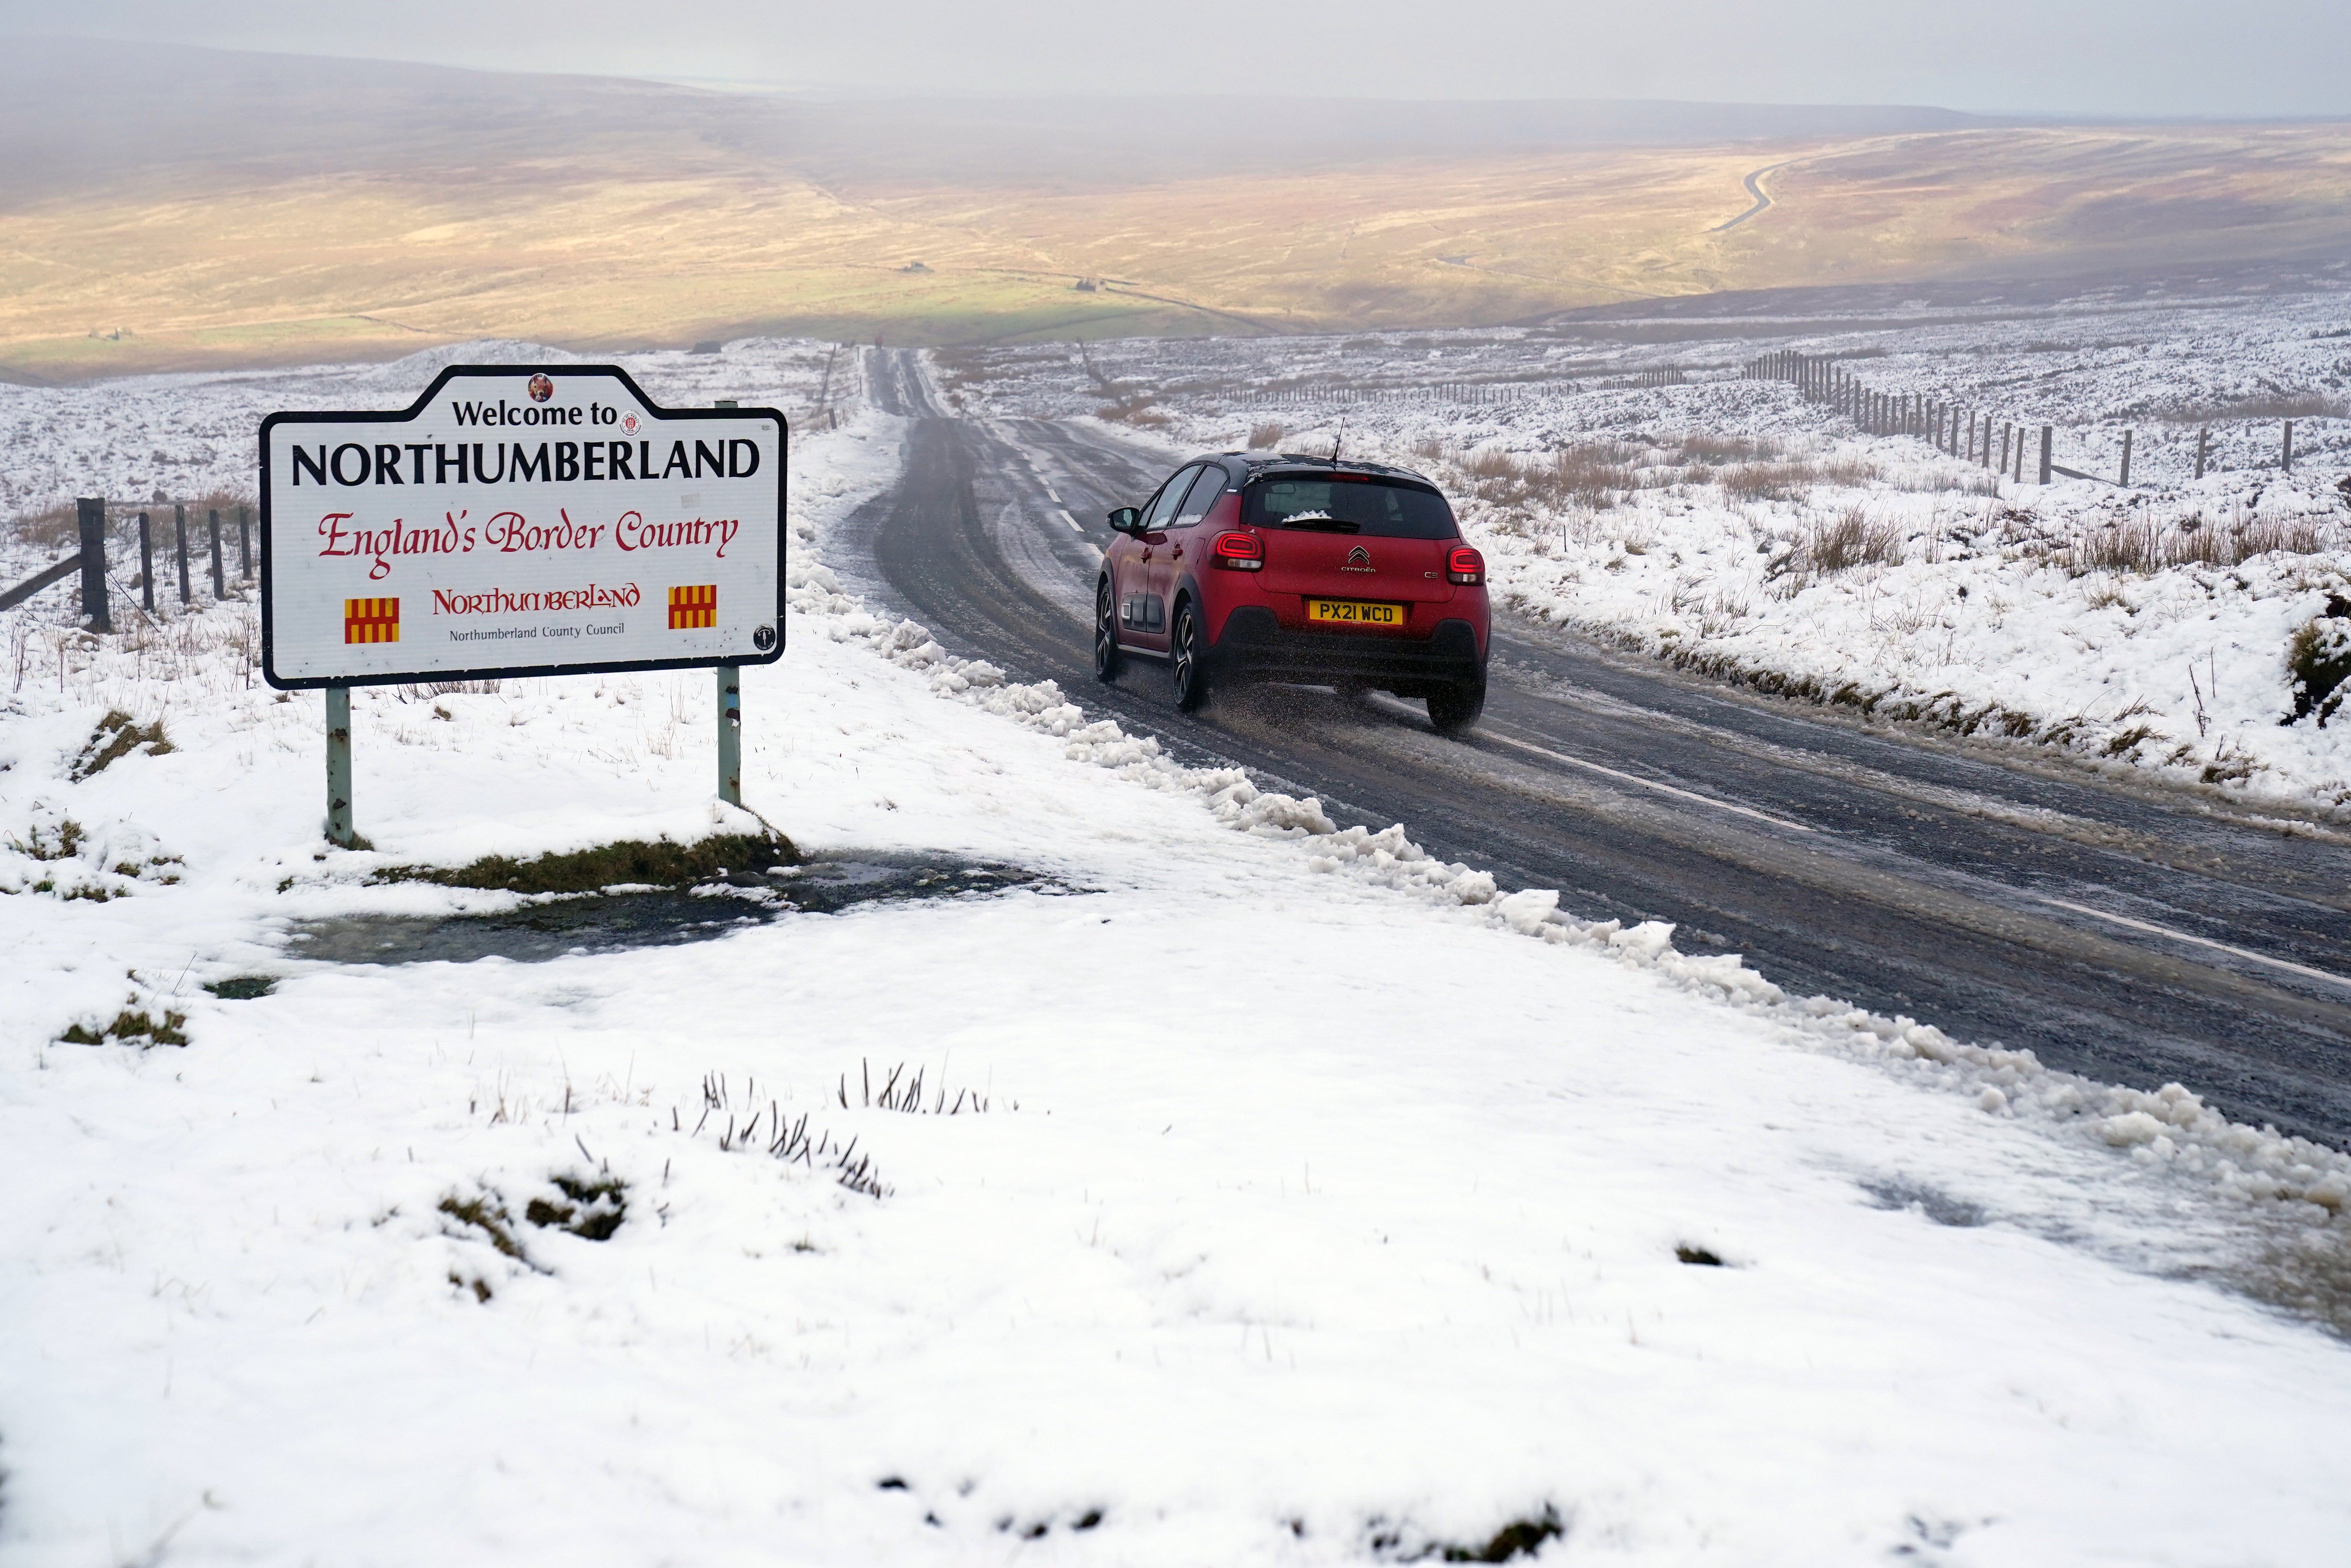 Snow is forecast for parts of the country this week